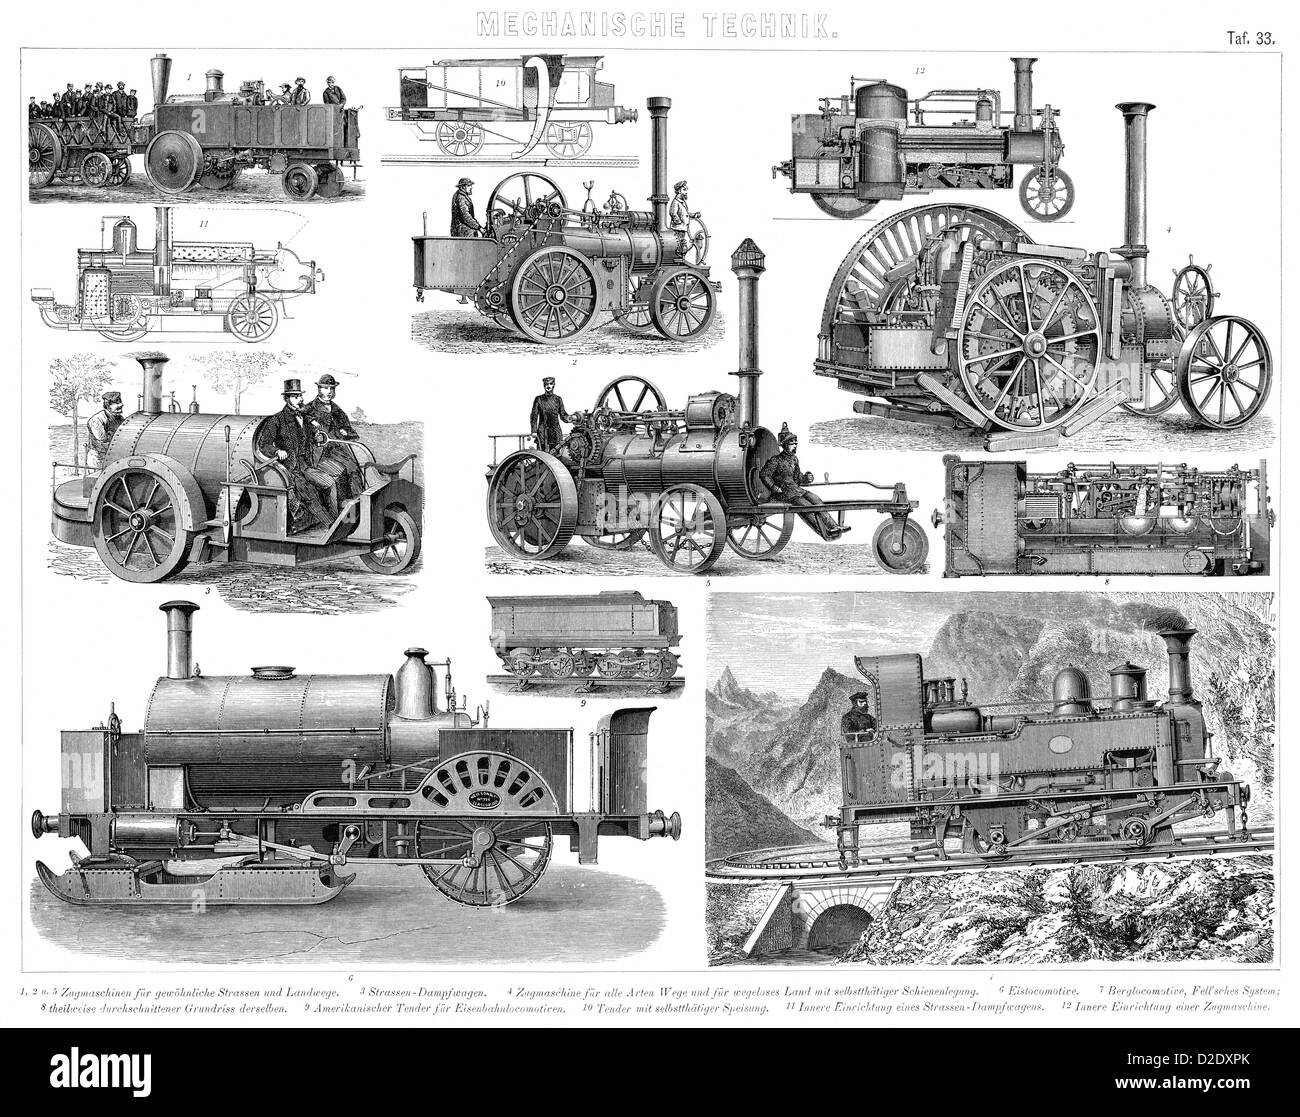 Vintage Locomotive, Trains and Steam Engines from the 19th Century Stock Photo